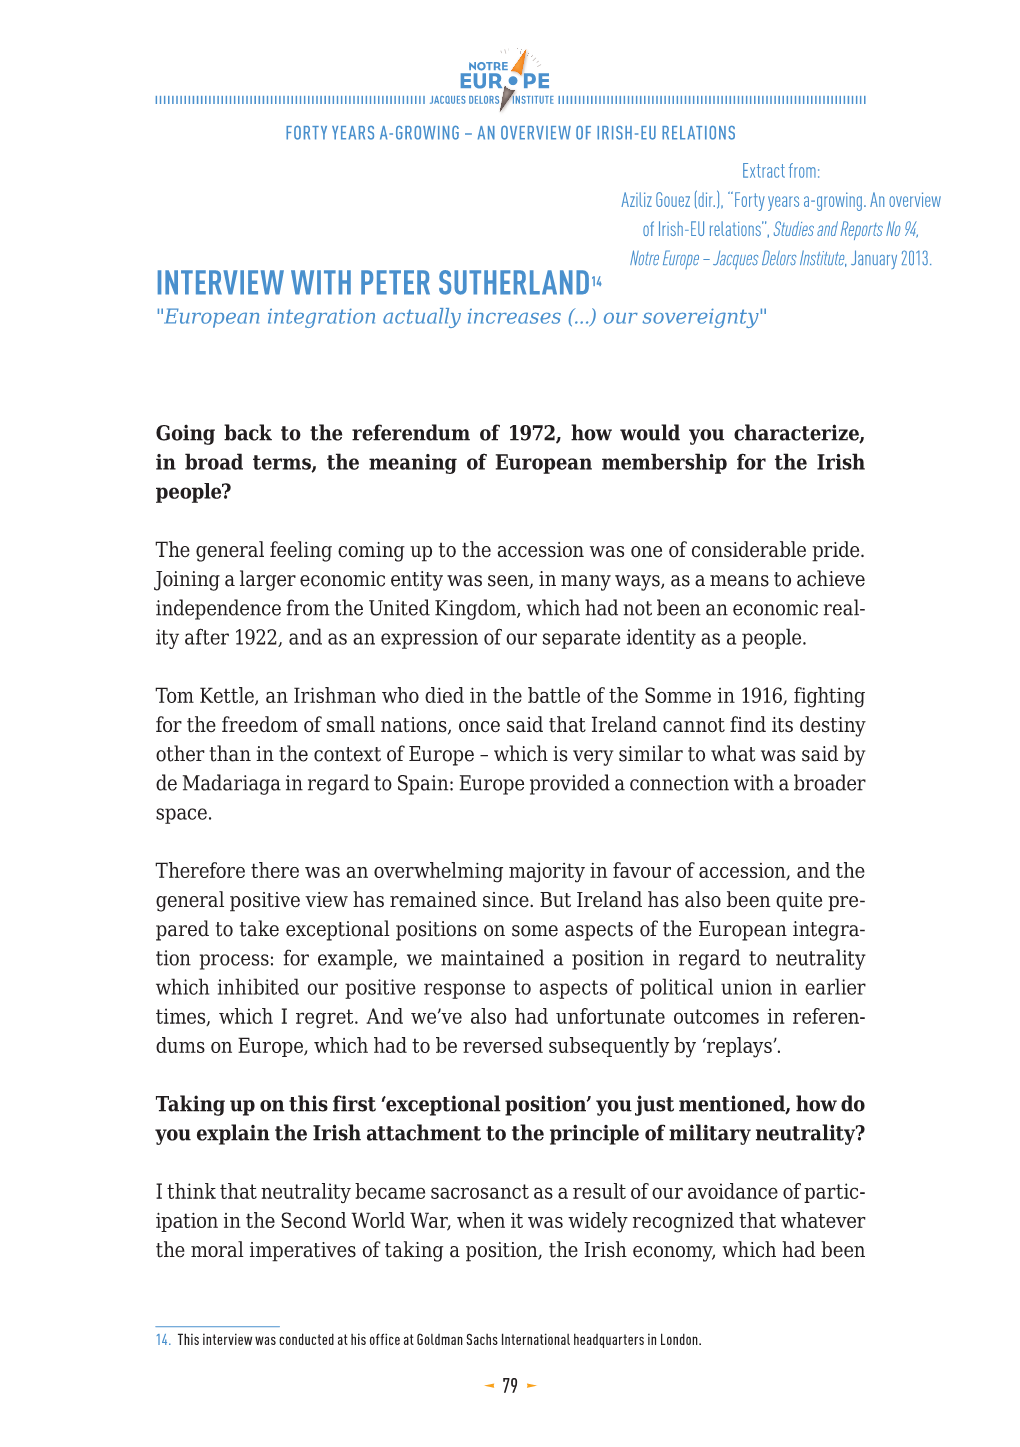 The Interview with Peter Sutherland